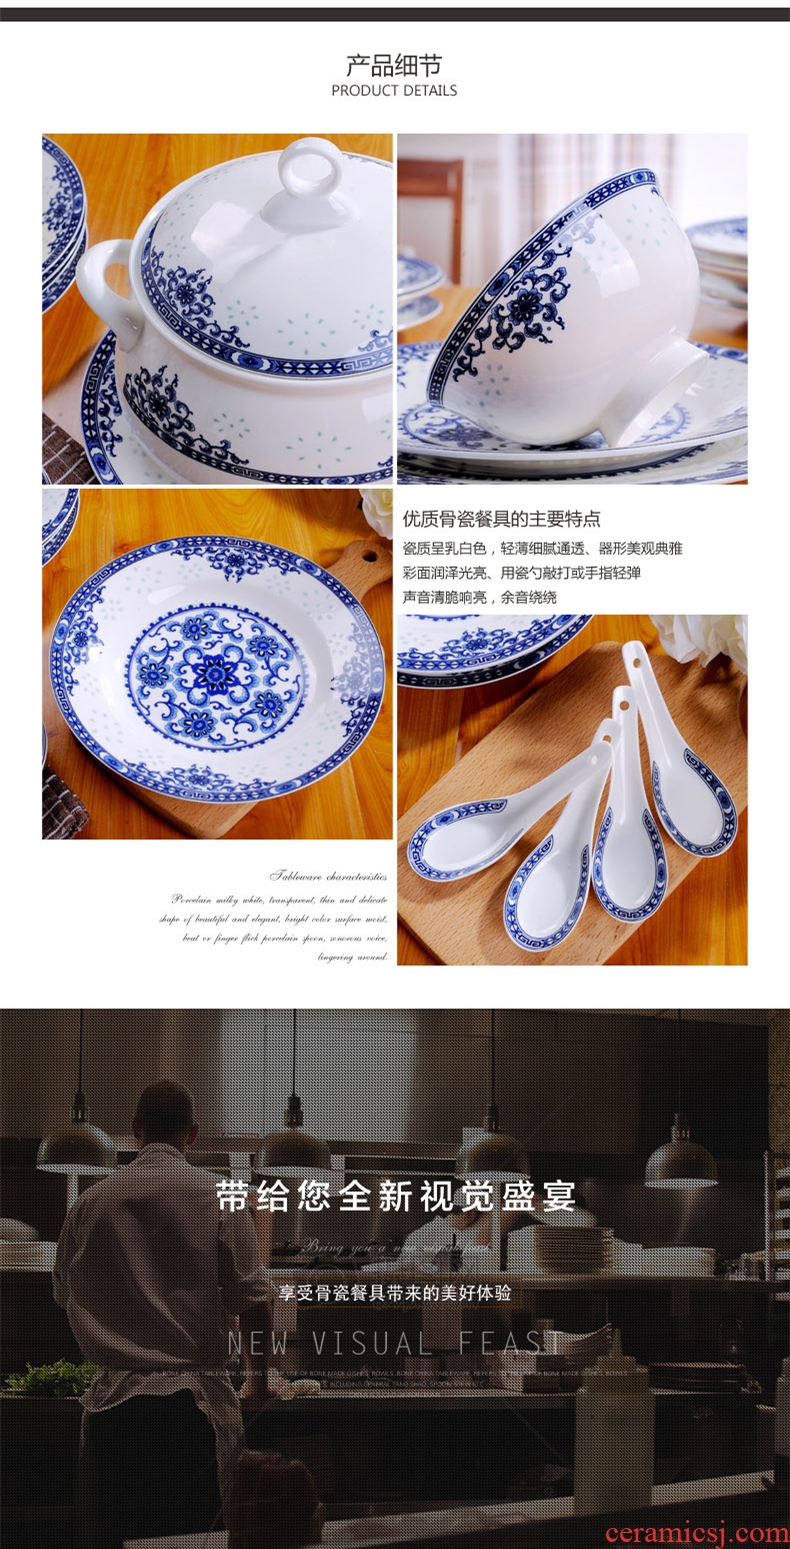 The dishes suit household of Chinese style jingdezhen fine white porcelain tableware high-grade porcelain gifts glair blue and white porcelain plate